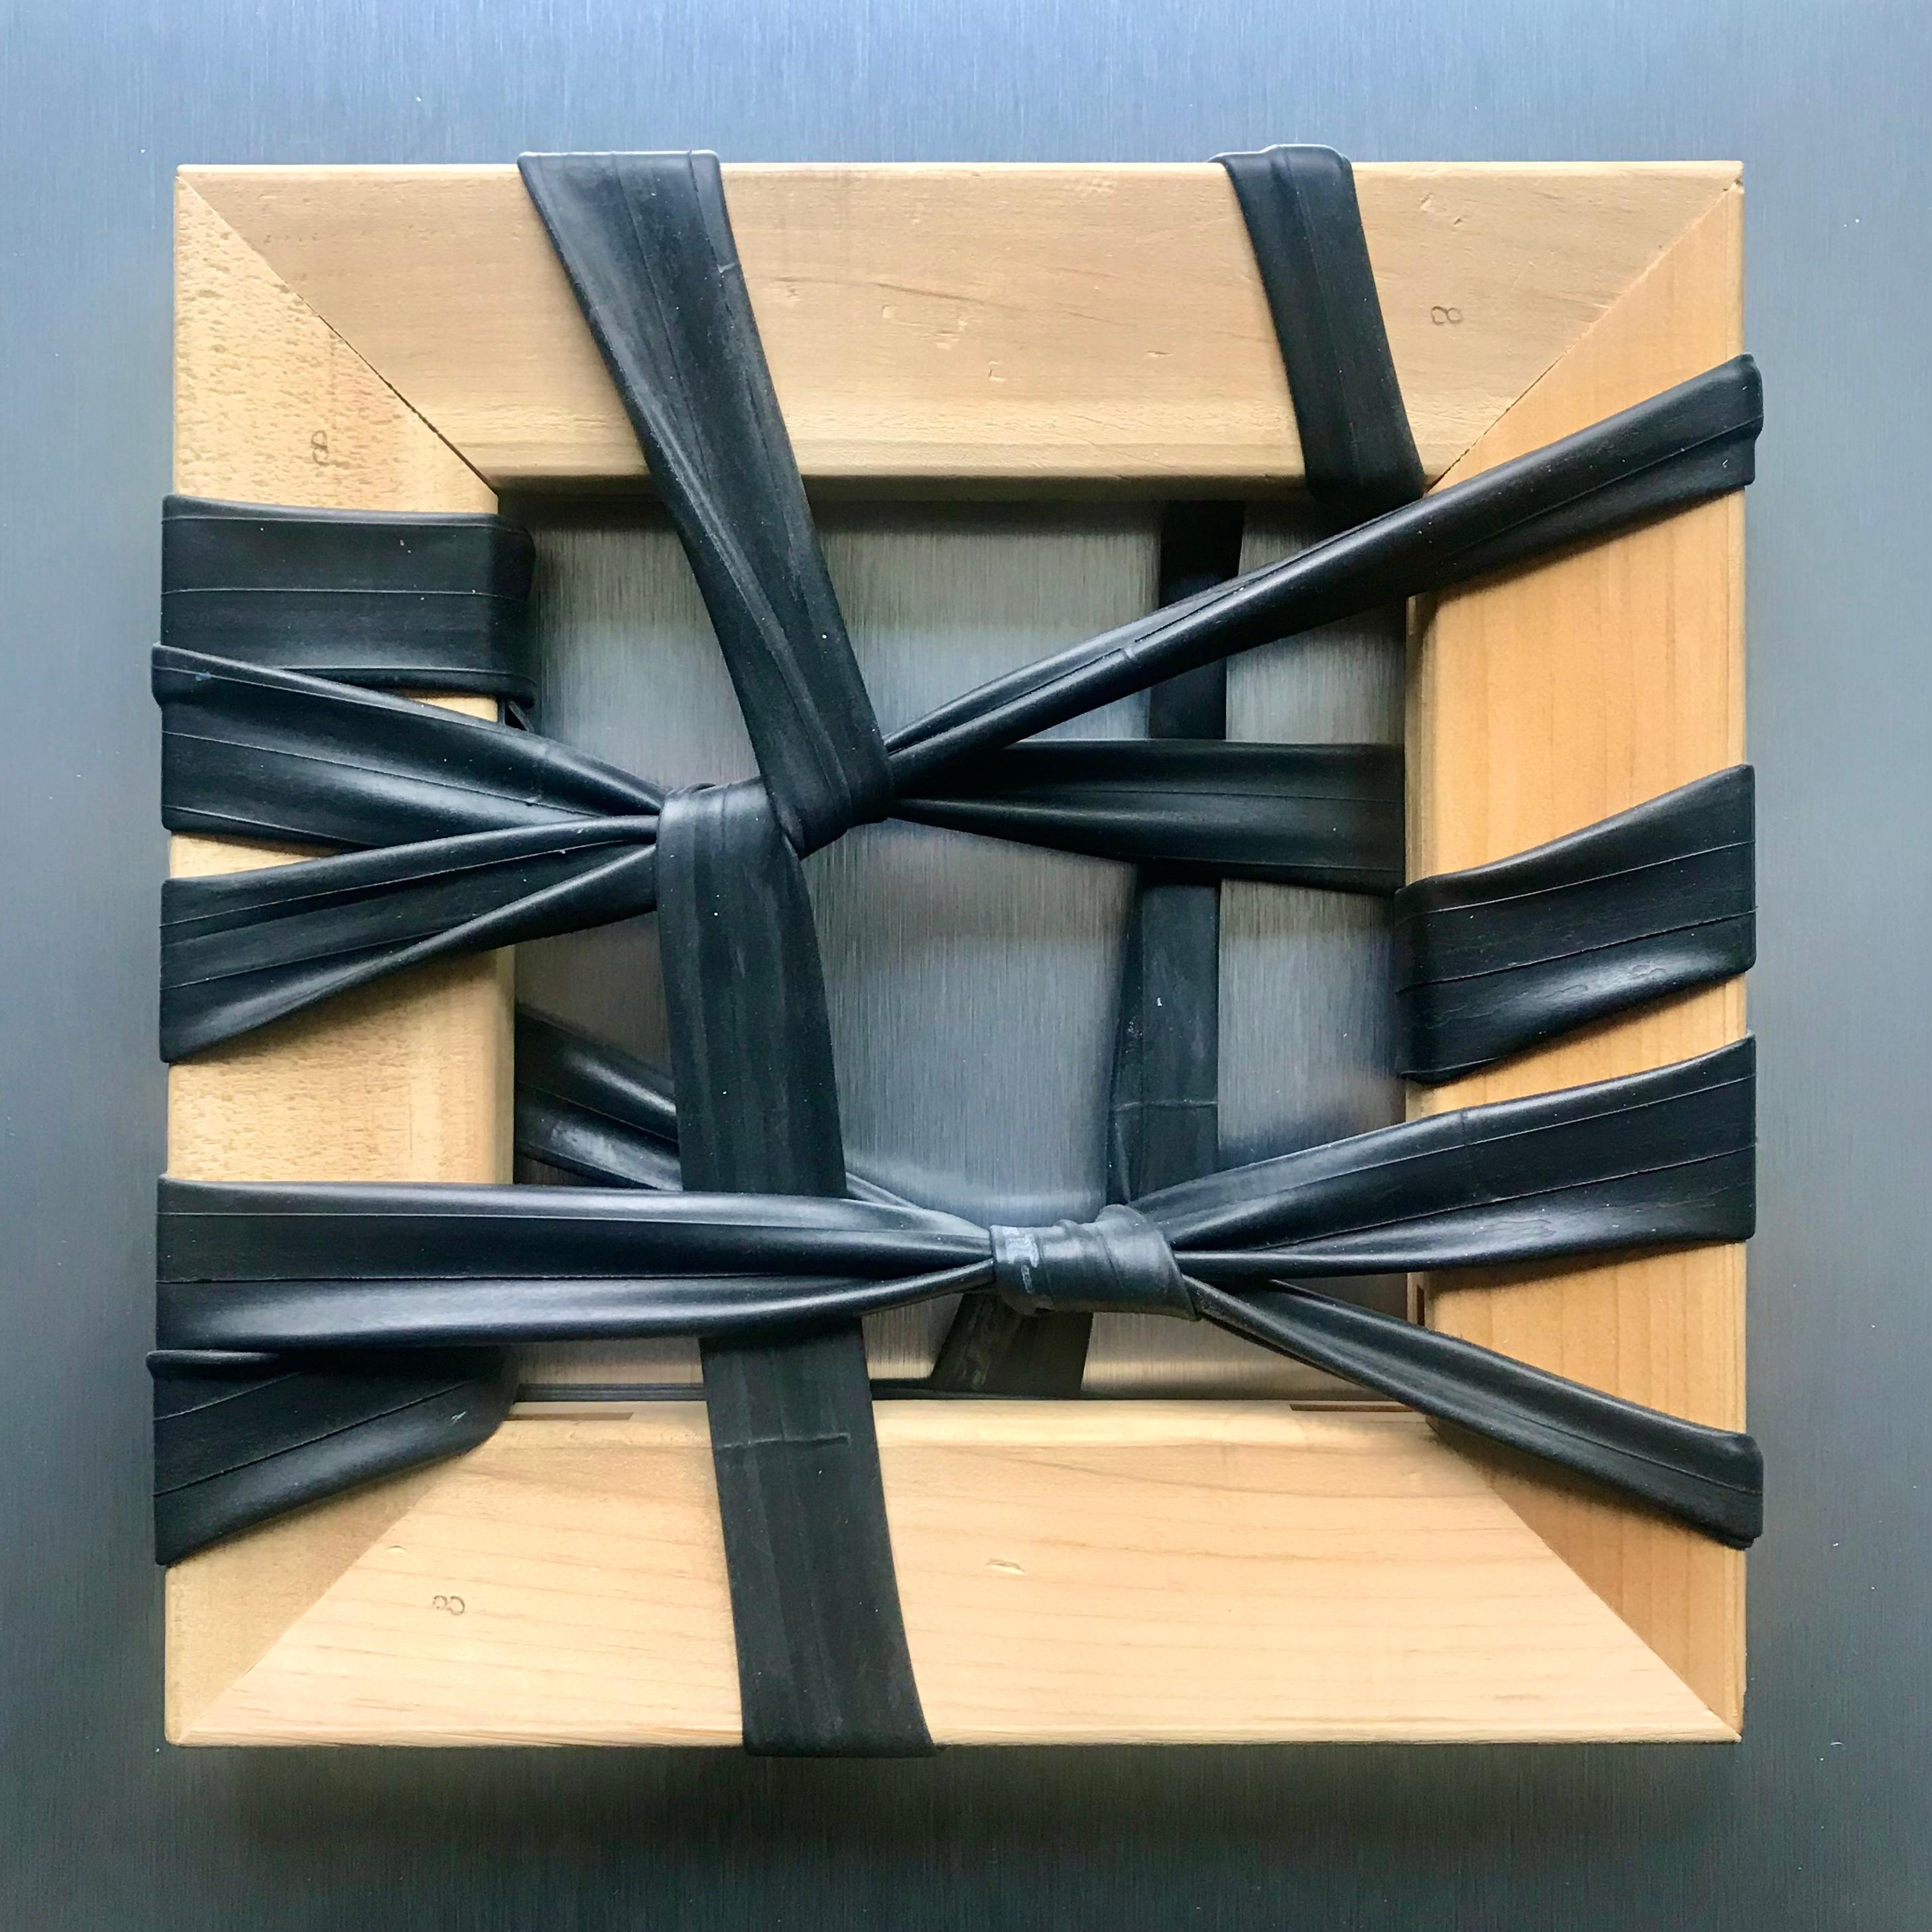 Stan Olthuis Abstract Painting - "Clue #3", abstract sculpture, wood, paint, rubber tubes, found objects